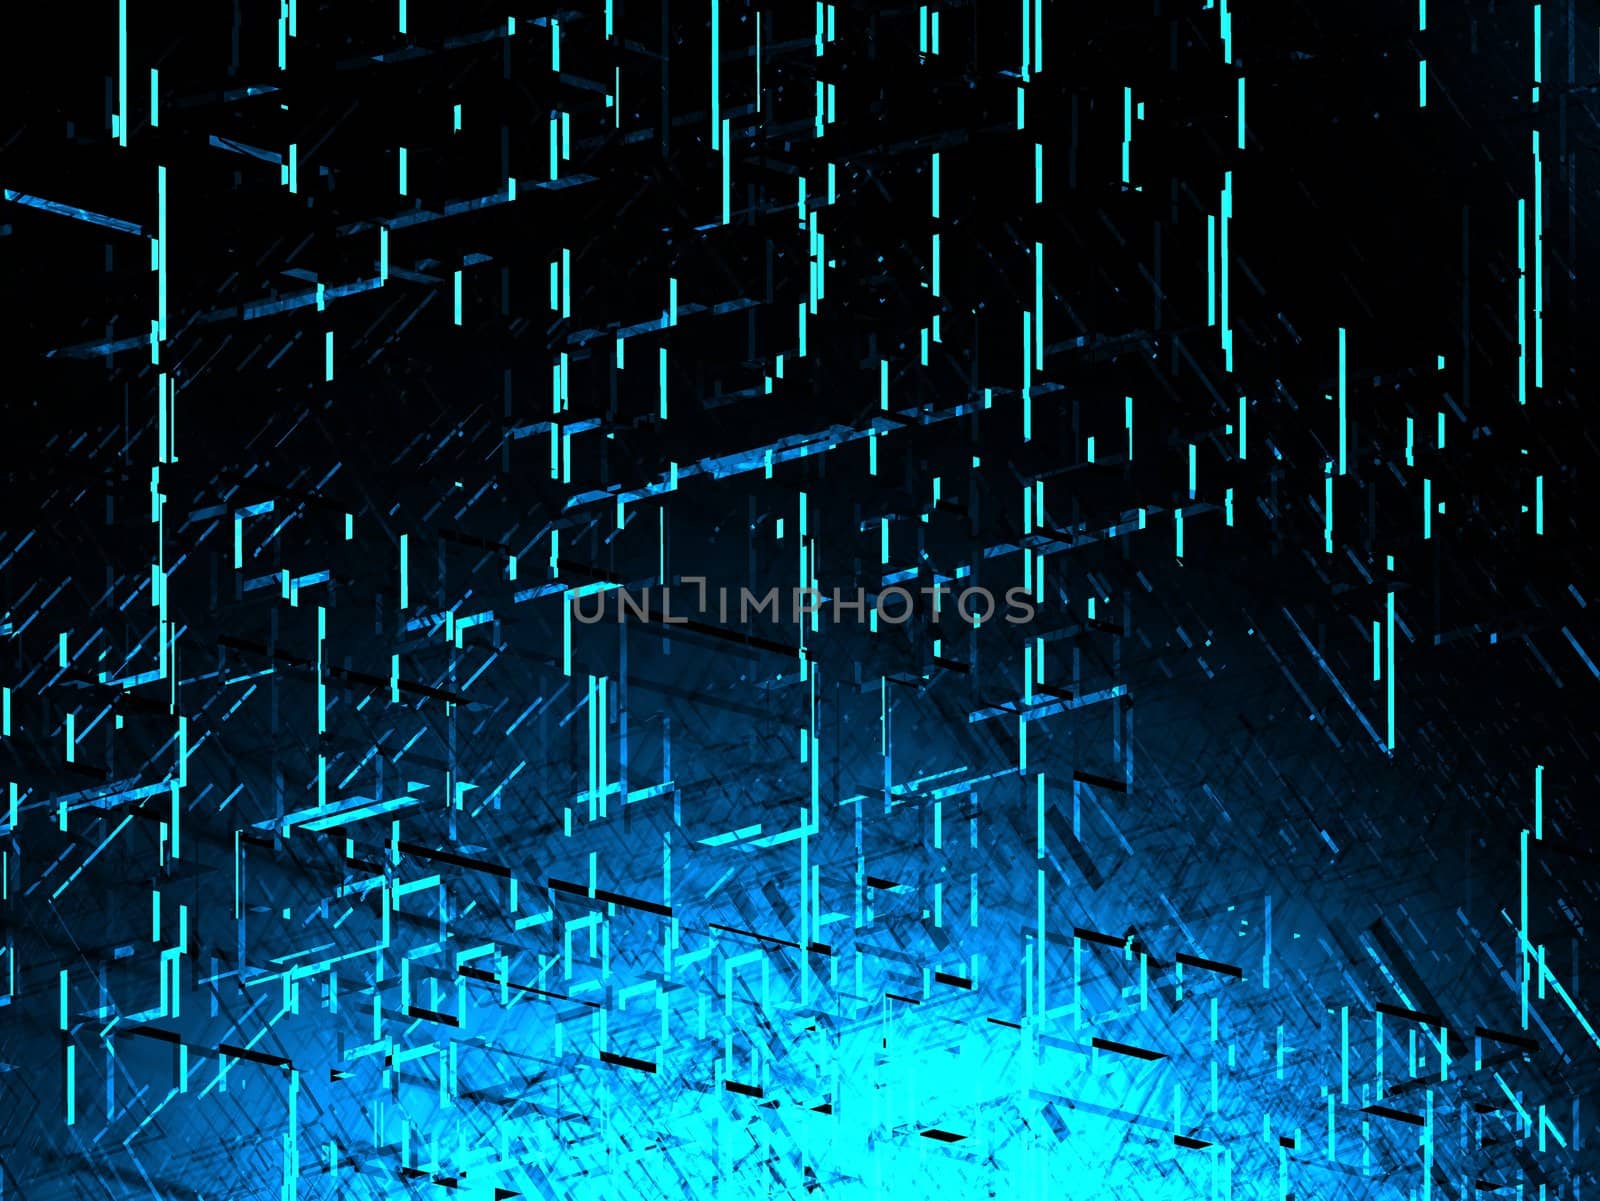 Abstract Composition in Blue by jasony00